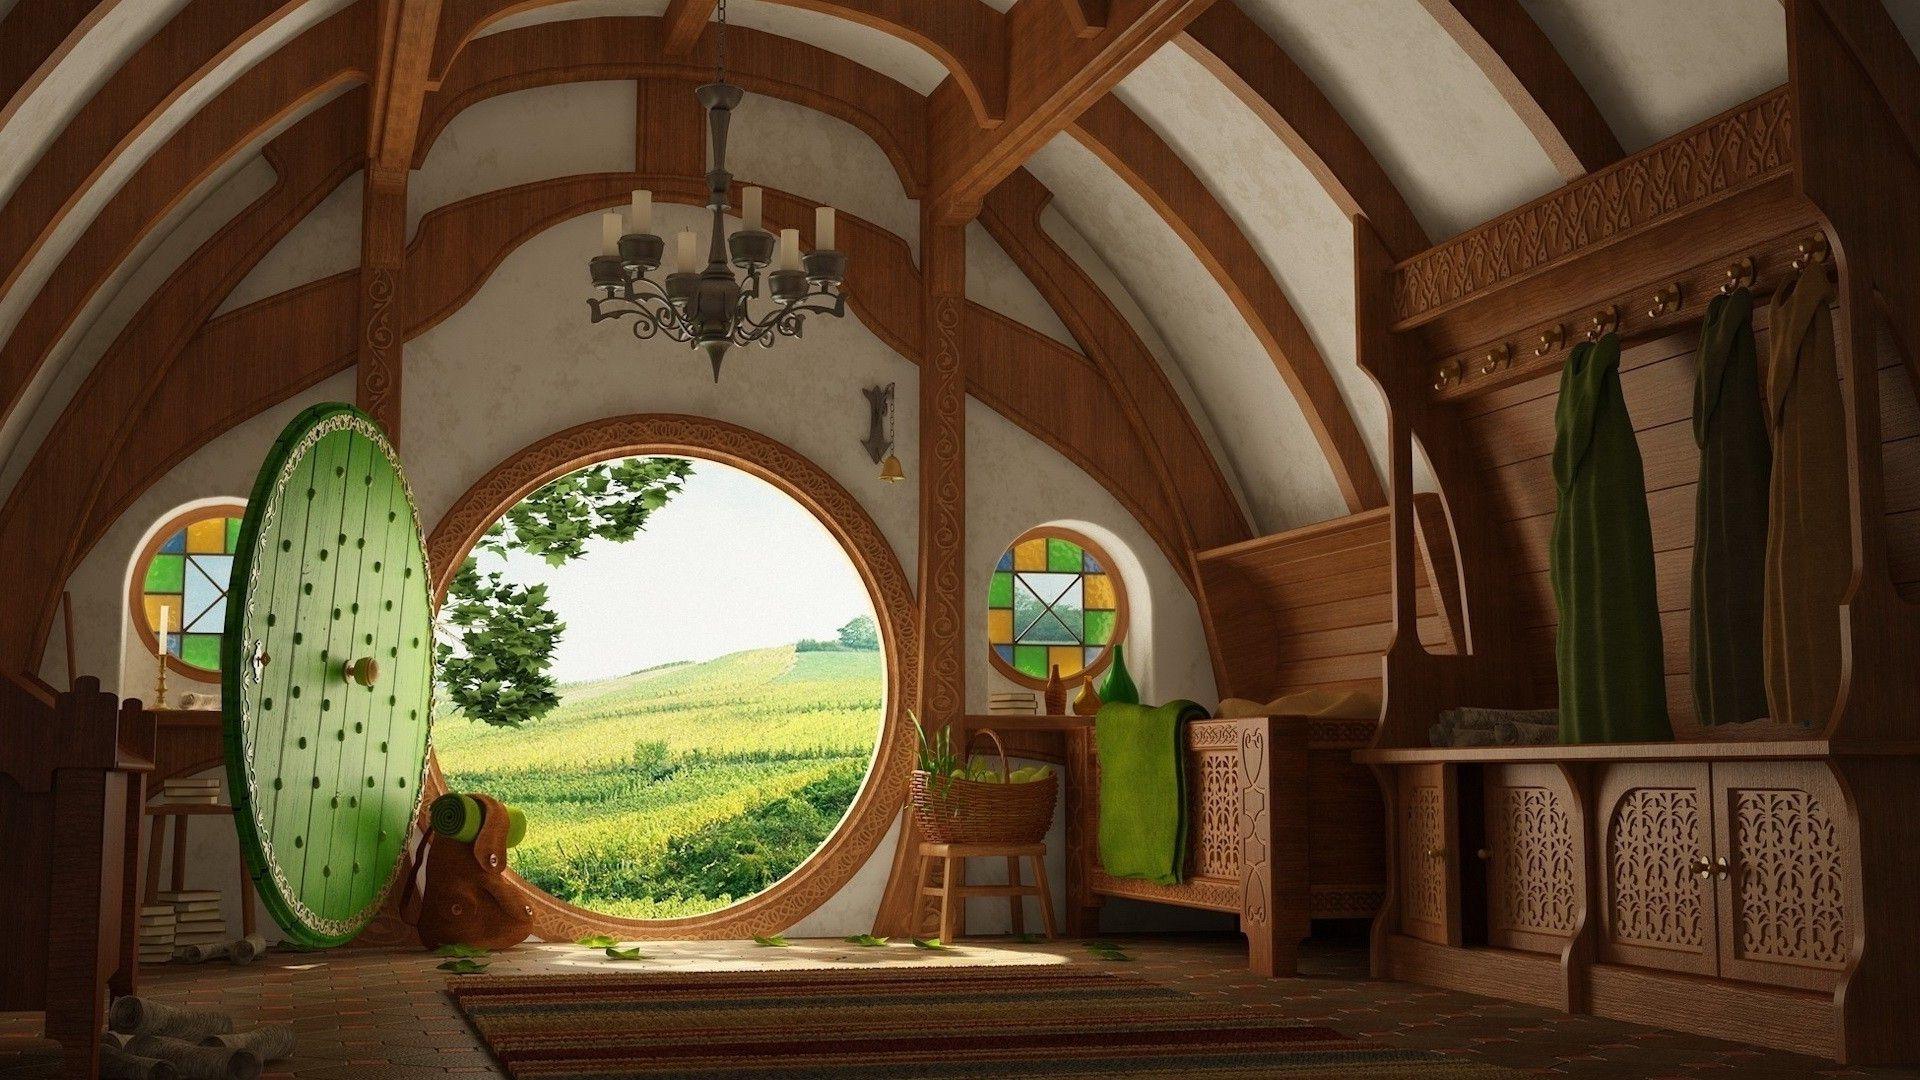 The Lord Of The Rings, Bag End, The Shire, Interiors, House